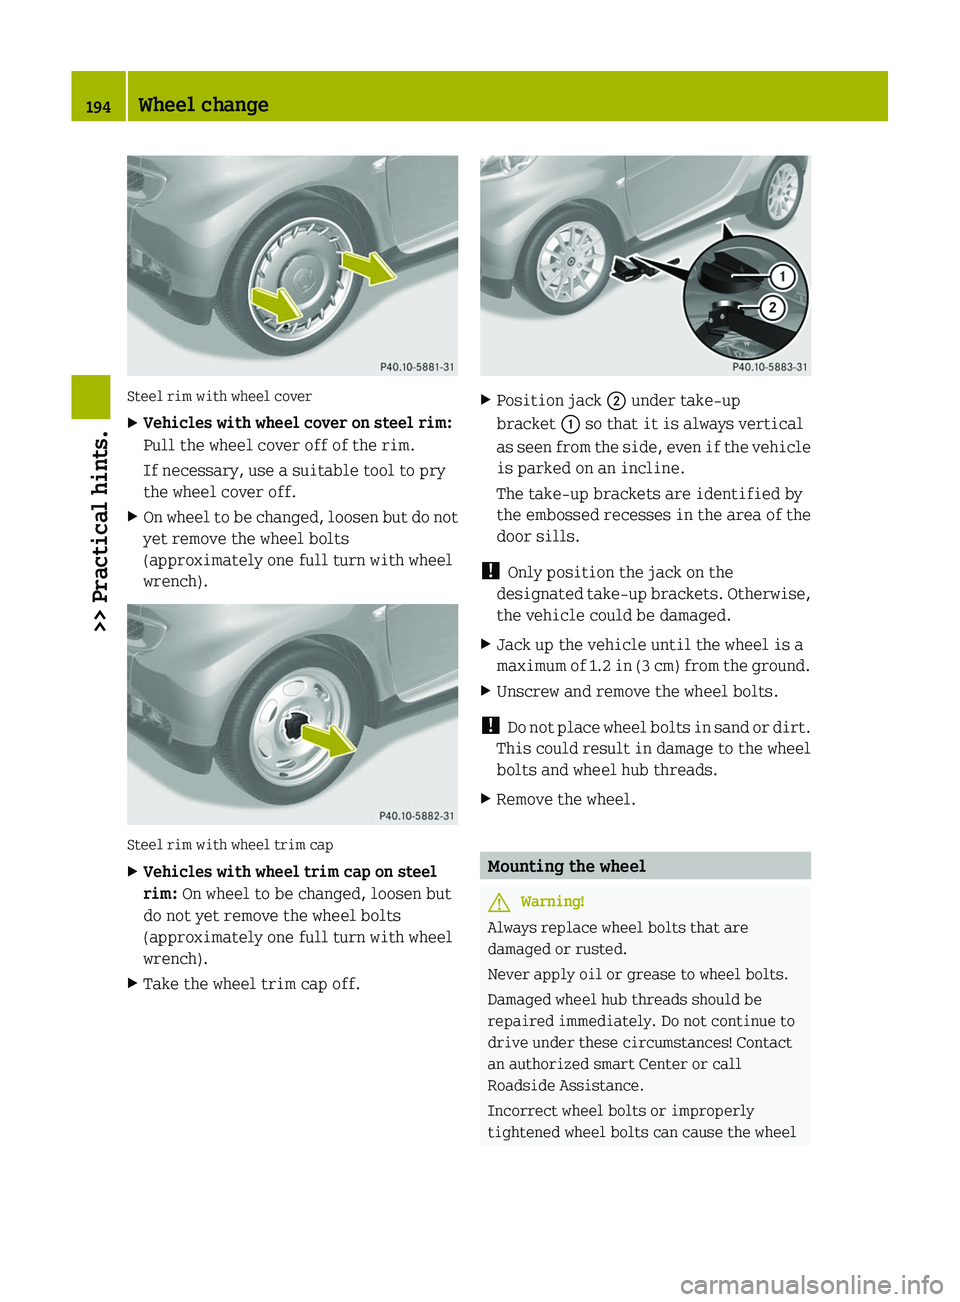 SMART FORTWO COUPE 2011  Owners Manual Steel rim with wheel cover
XVehicles with wheel cover on steel rim:
Pull the wheel cover off of the rim.
If necessary, use a suitable tool to pry
the wheel cover off.
XOn wheel to be changed, loosen b